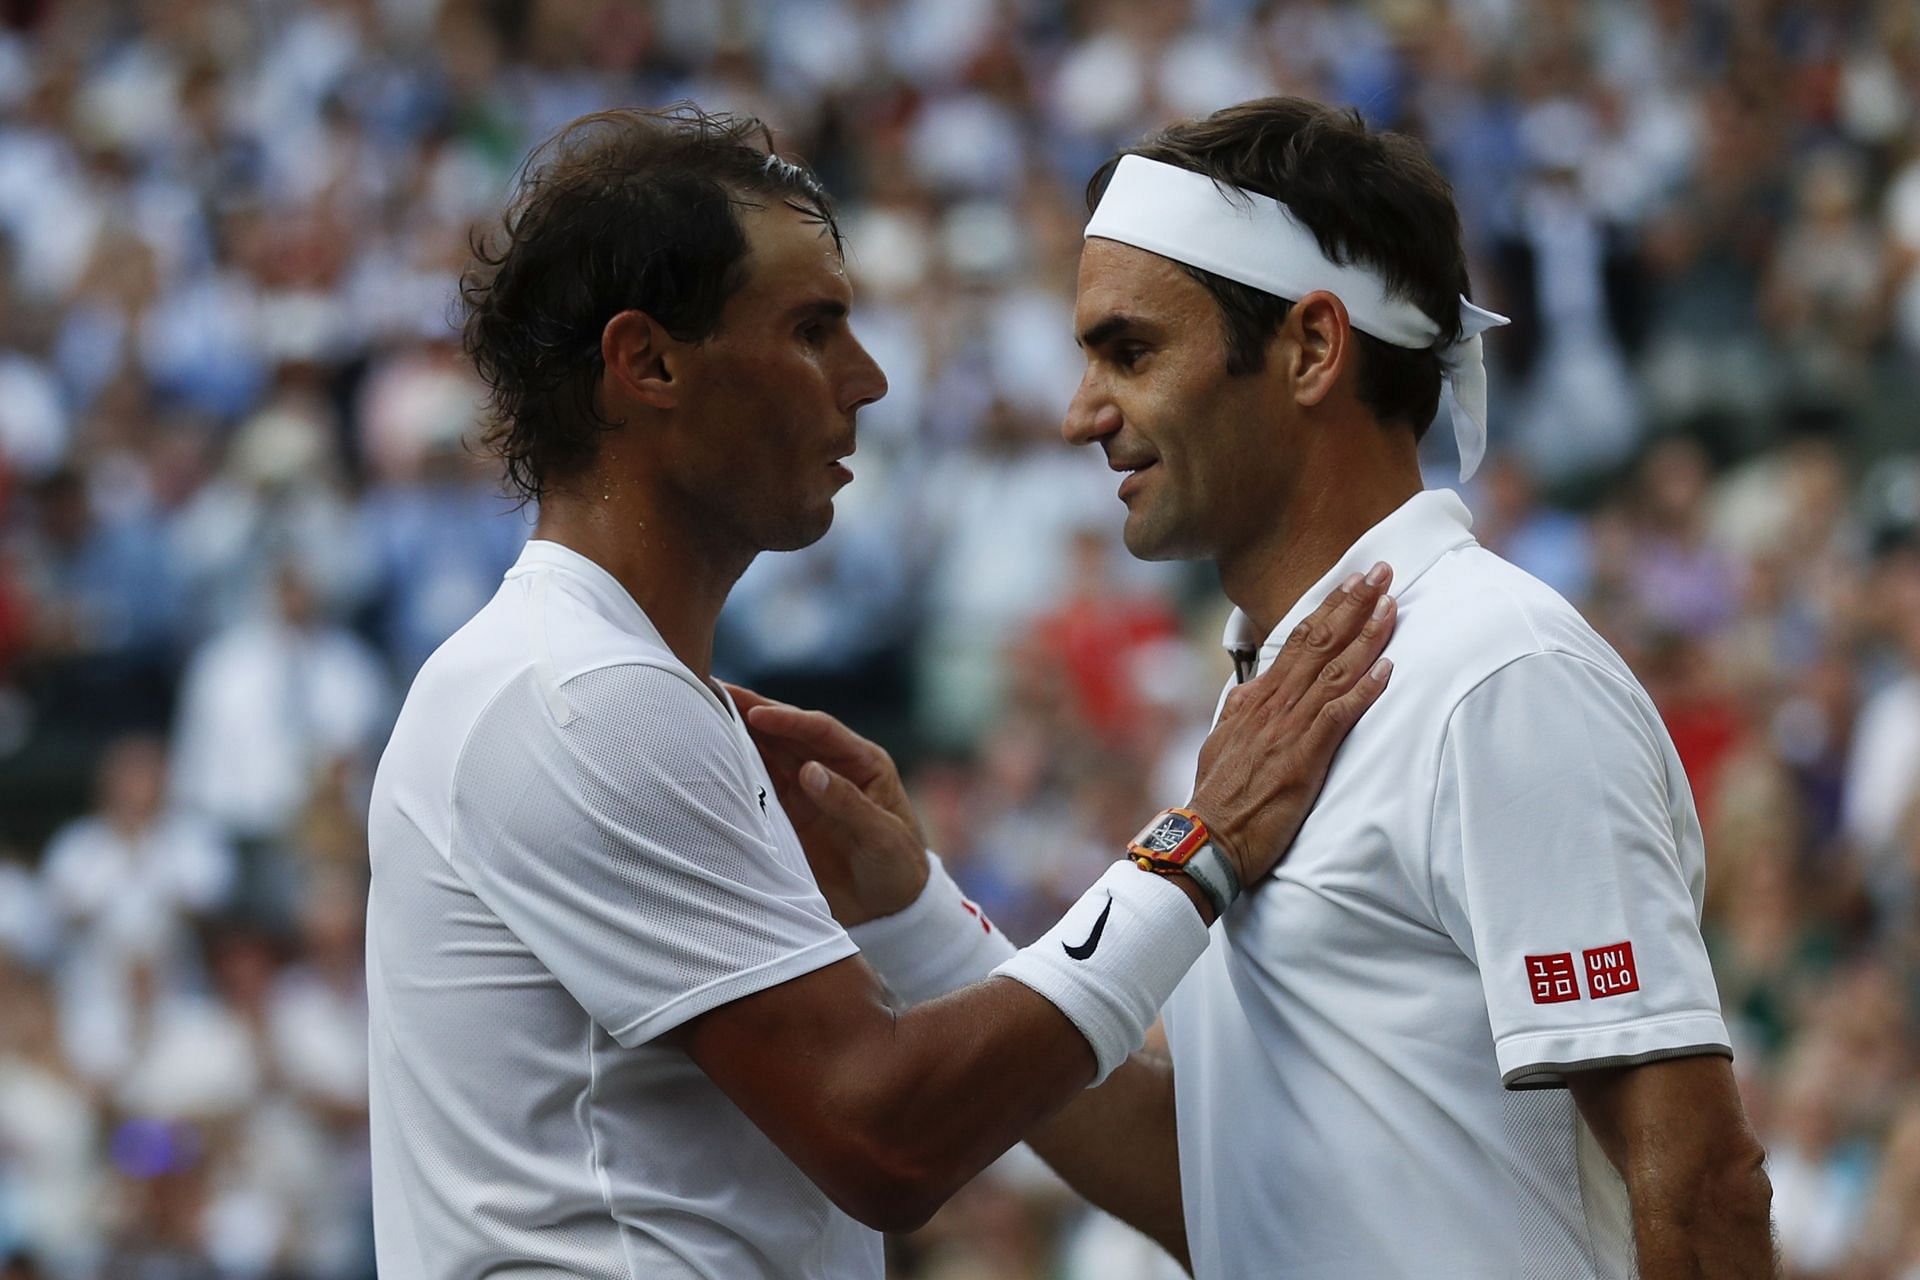 Roger Federer and Rafael Nadal at The Championships - Wimbledon 2019